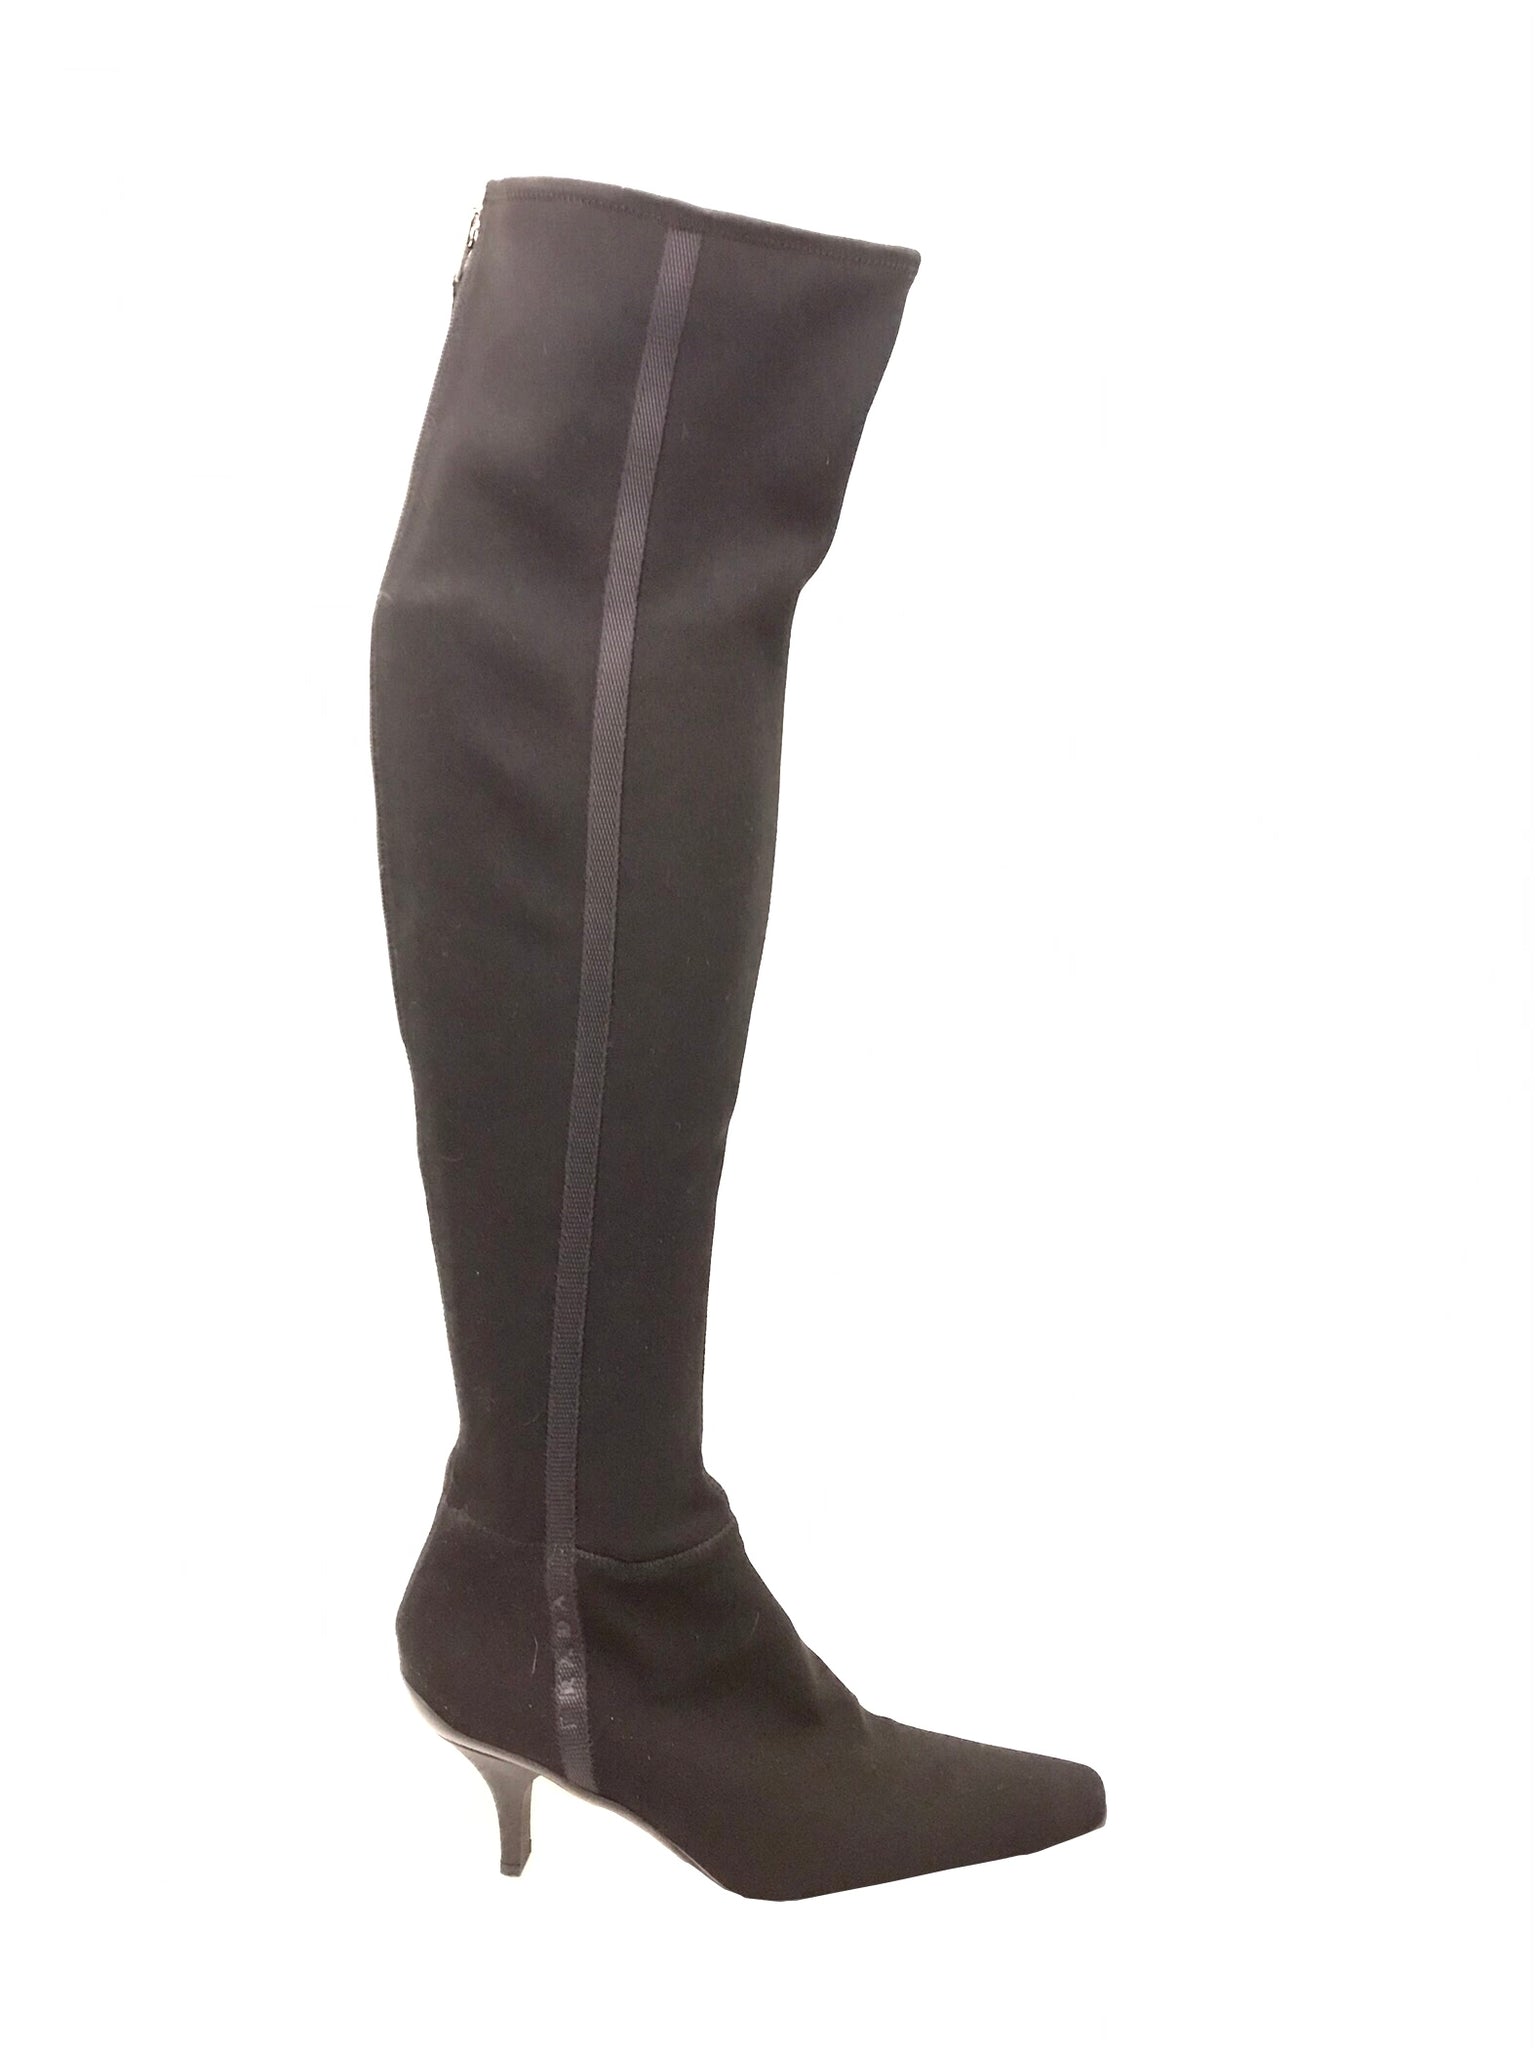 Techno Knee High Boots